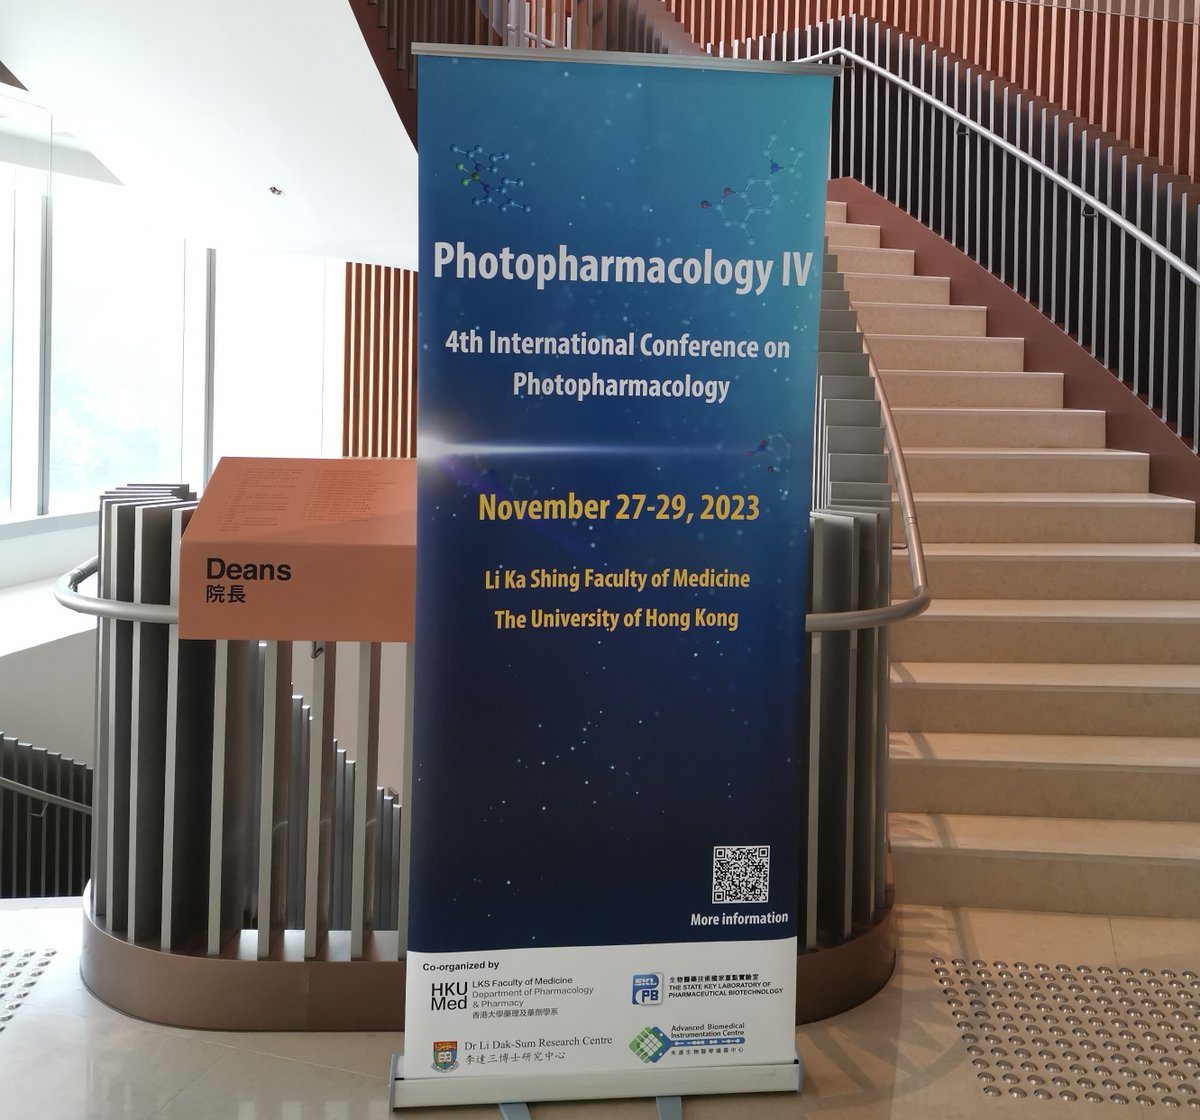 It's my great honor to chair #Photopharmacology IV. A very successful conference held @hkumed. Thank you to all speakers and participants (~120) from ~20 countries, as well as conference staff, organizers (@HkuPharm), supporting organizations, and sponsors. See you in 2025！